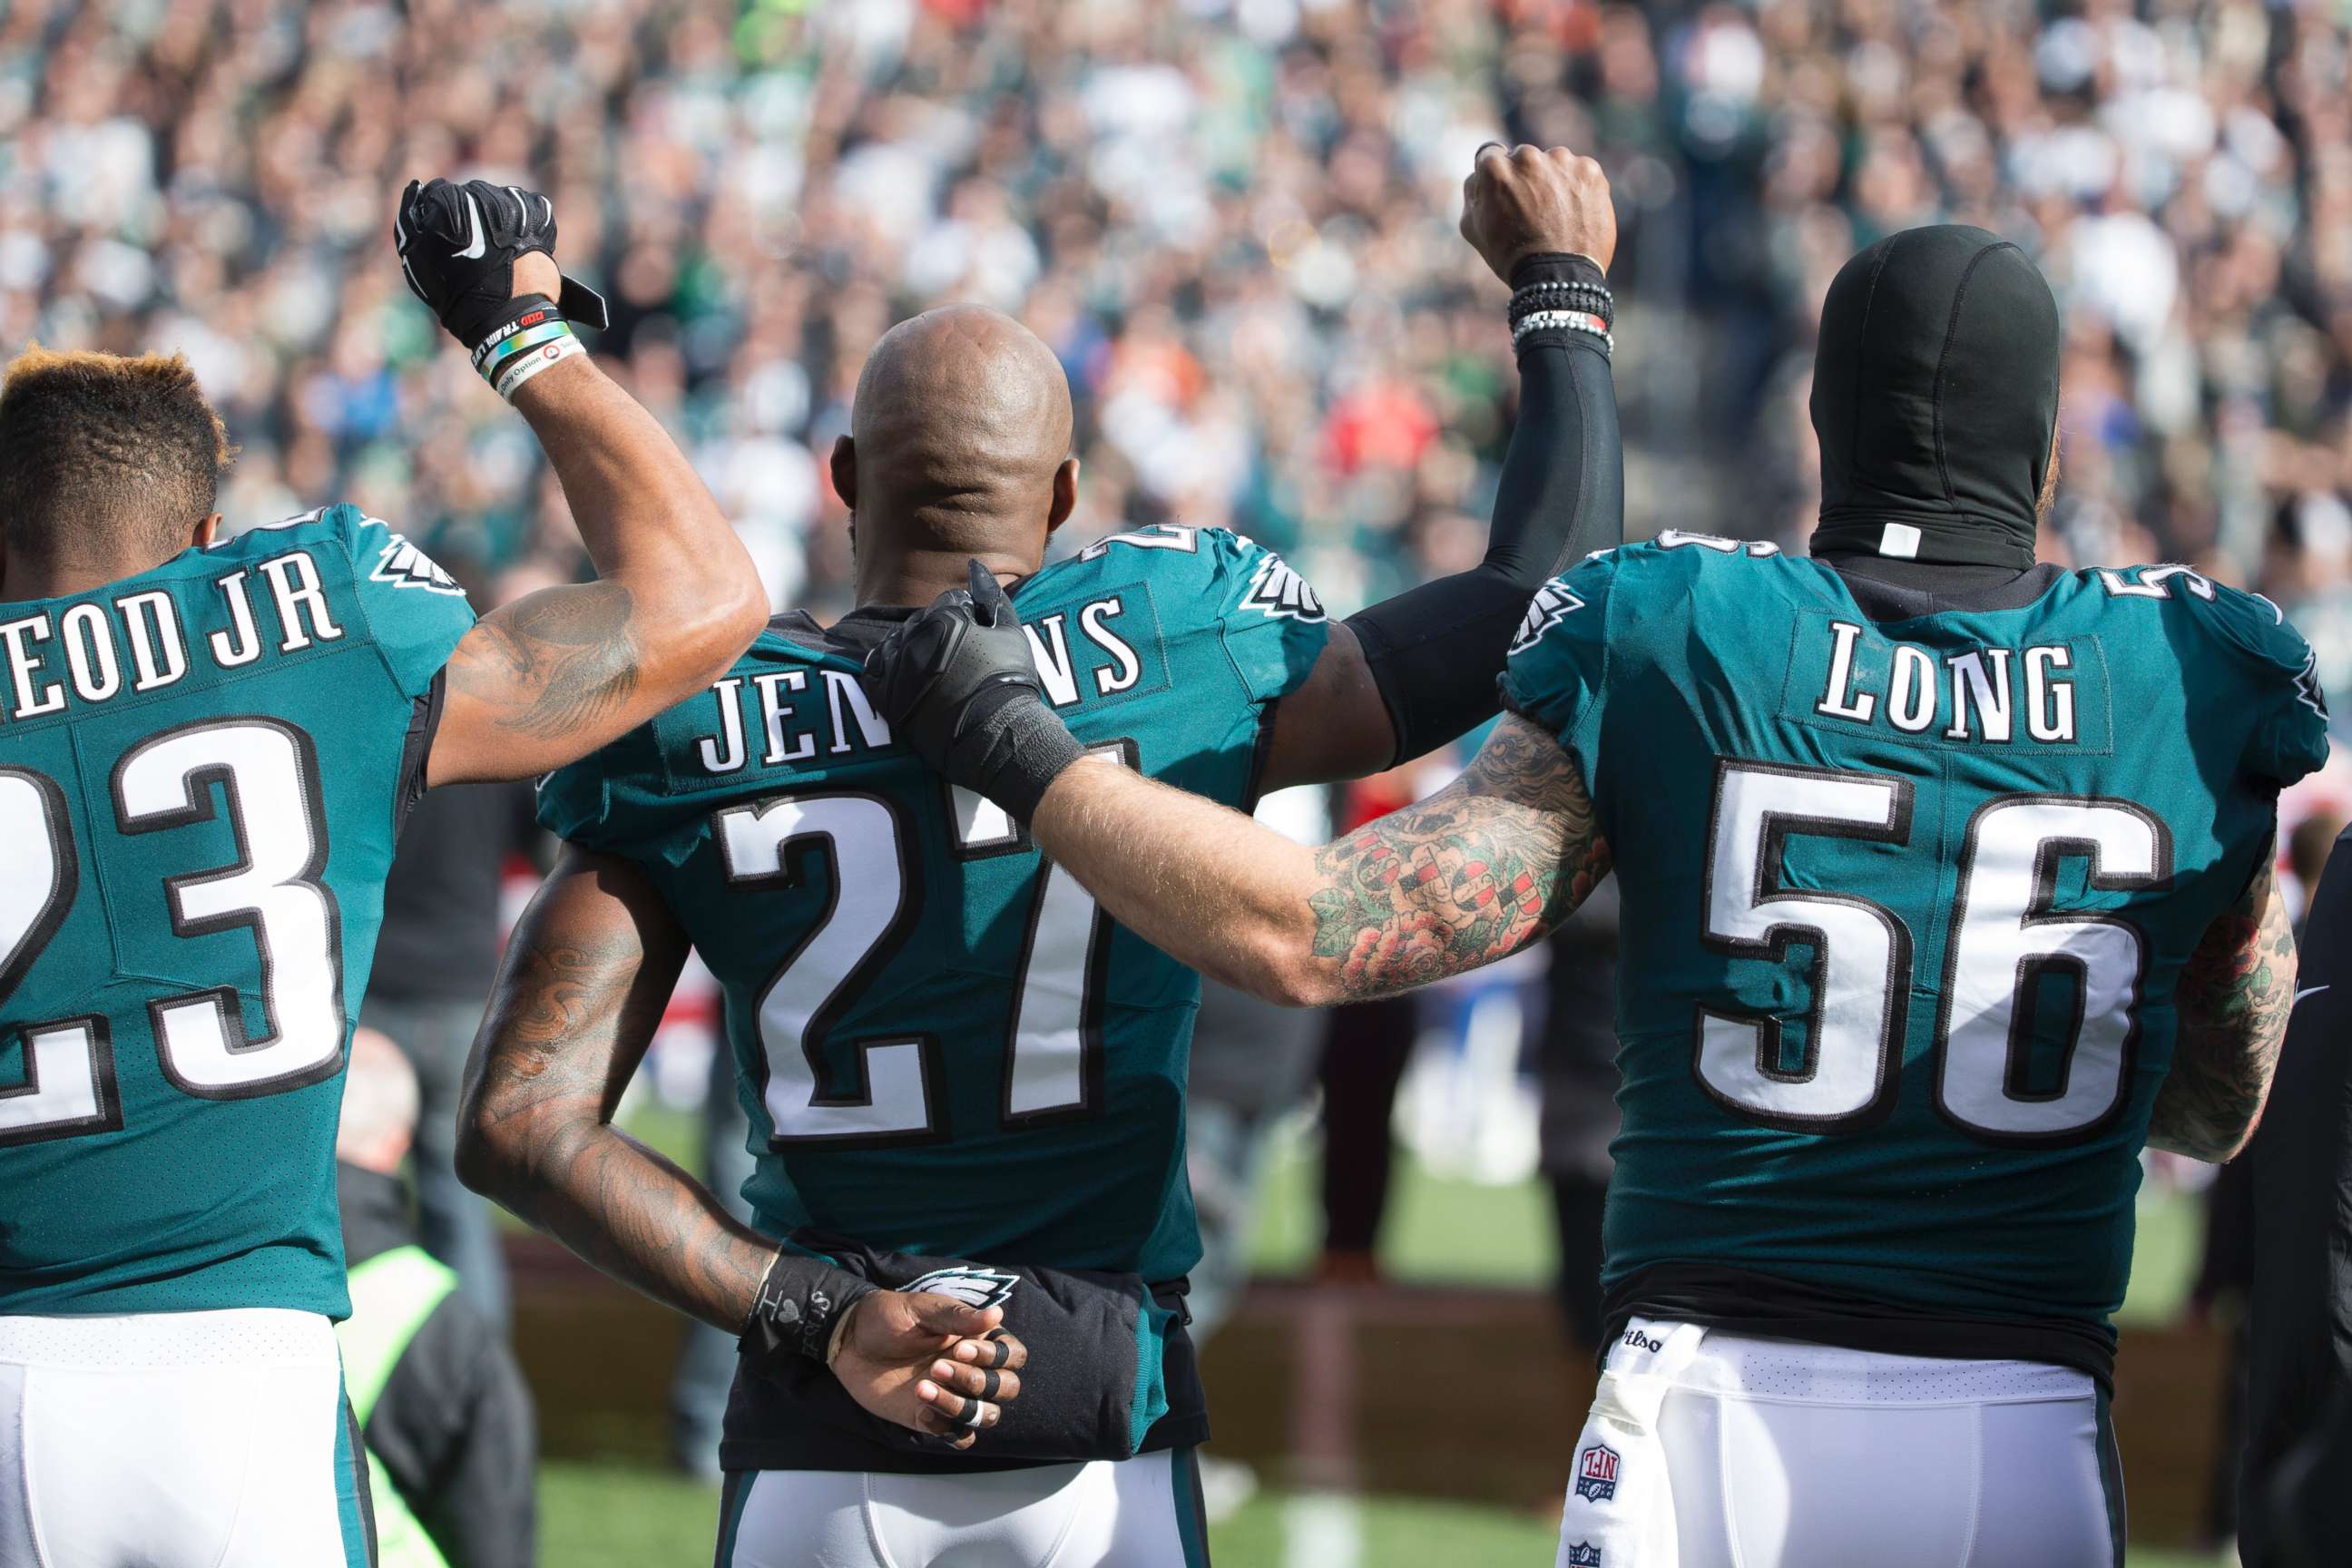 PHOTO: Rodney McLeod and Malcolm Jenkins of the Philadelphia Eagles raise their fists as teammate Chris Long #56 stands alongside them during the national anthem prior to the game against the Chicago Bears at Lincoln Financial Field on Nov. 26, 2017.